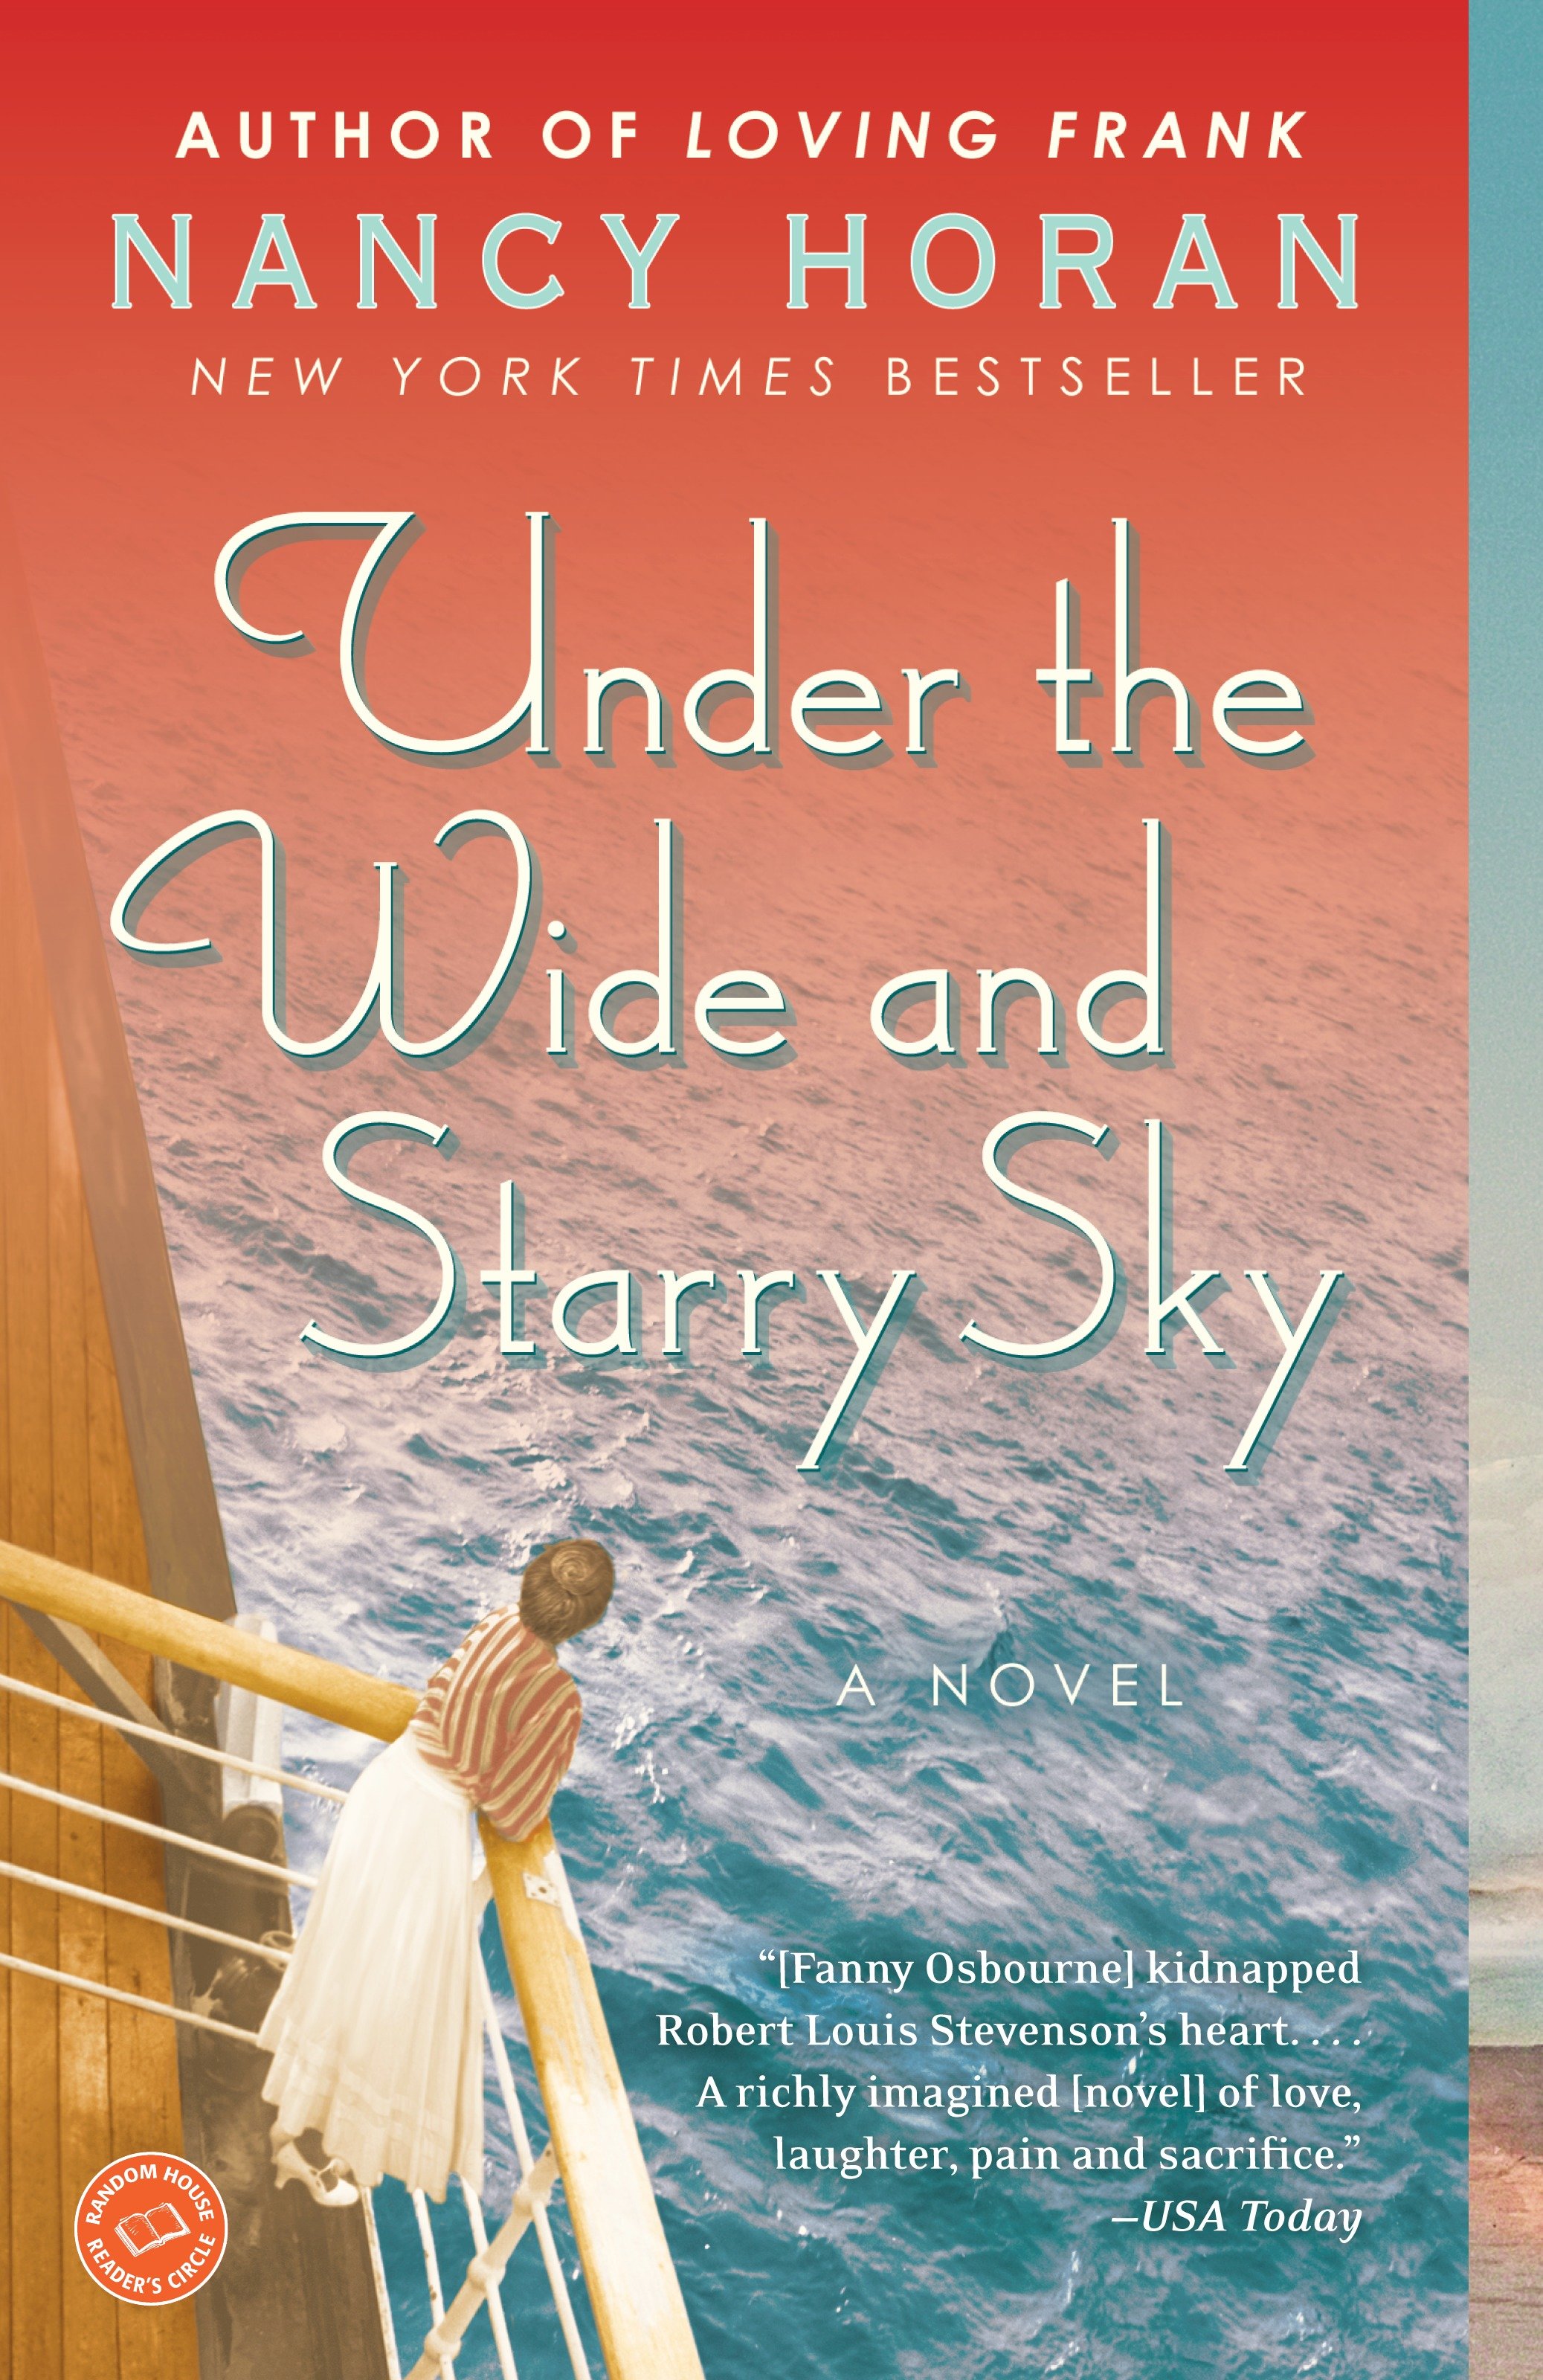 Under the wide and starry sky cover image